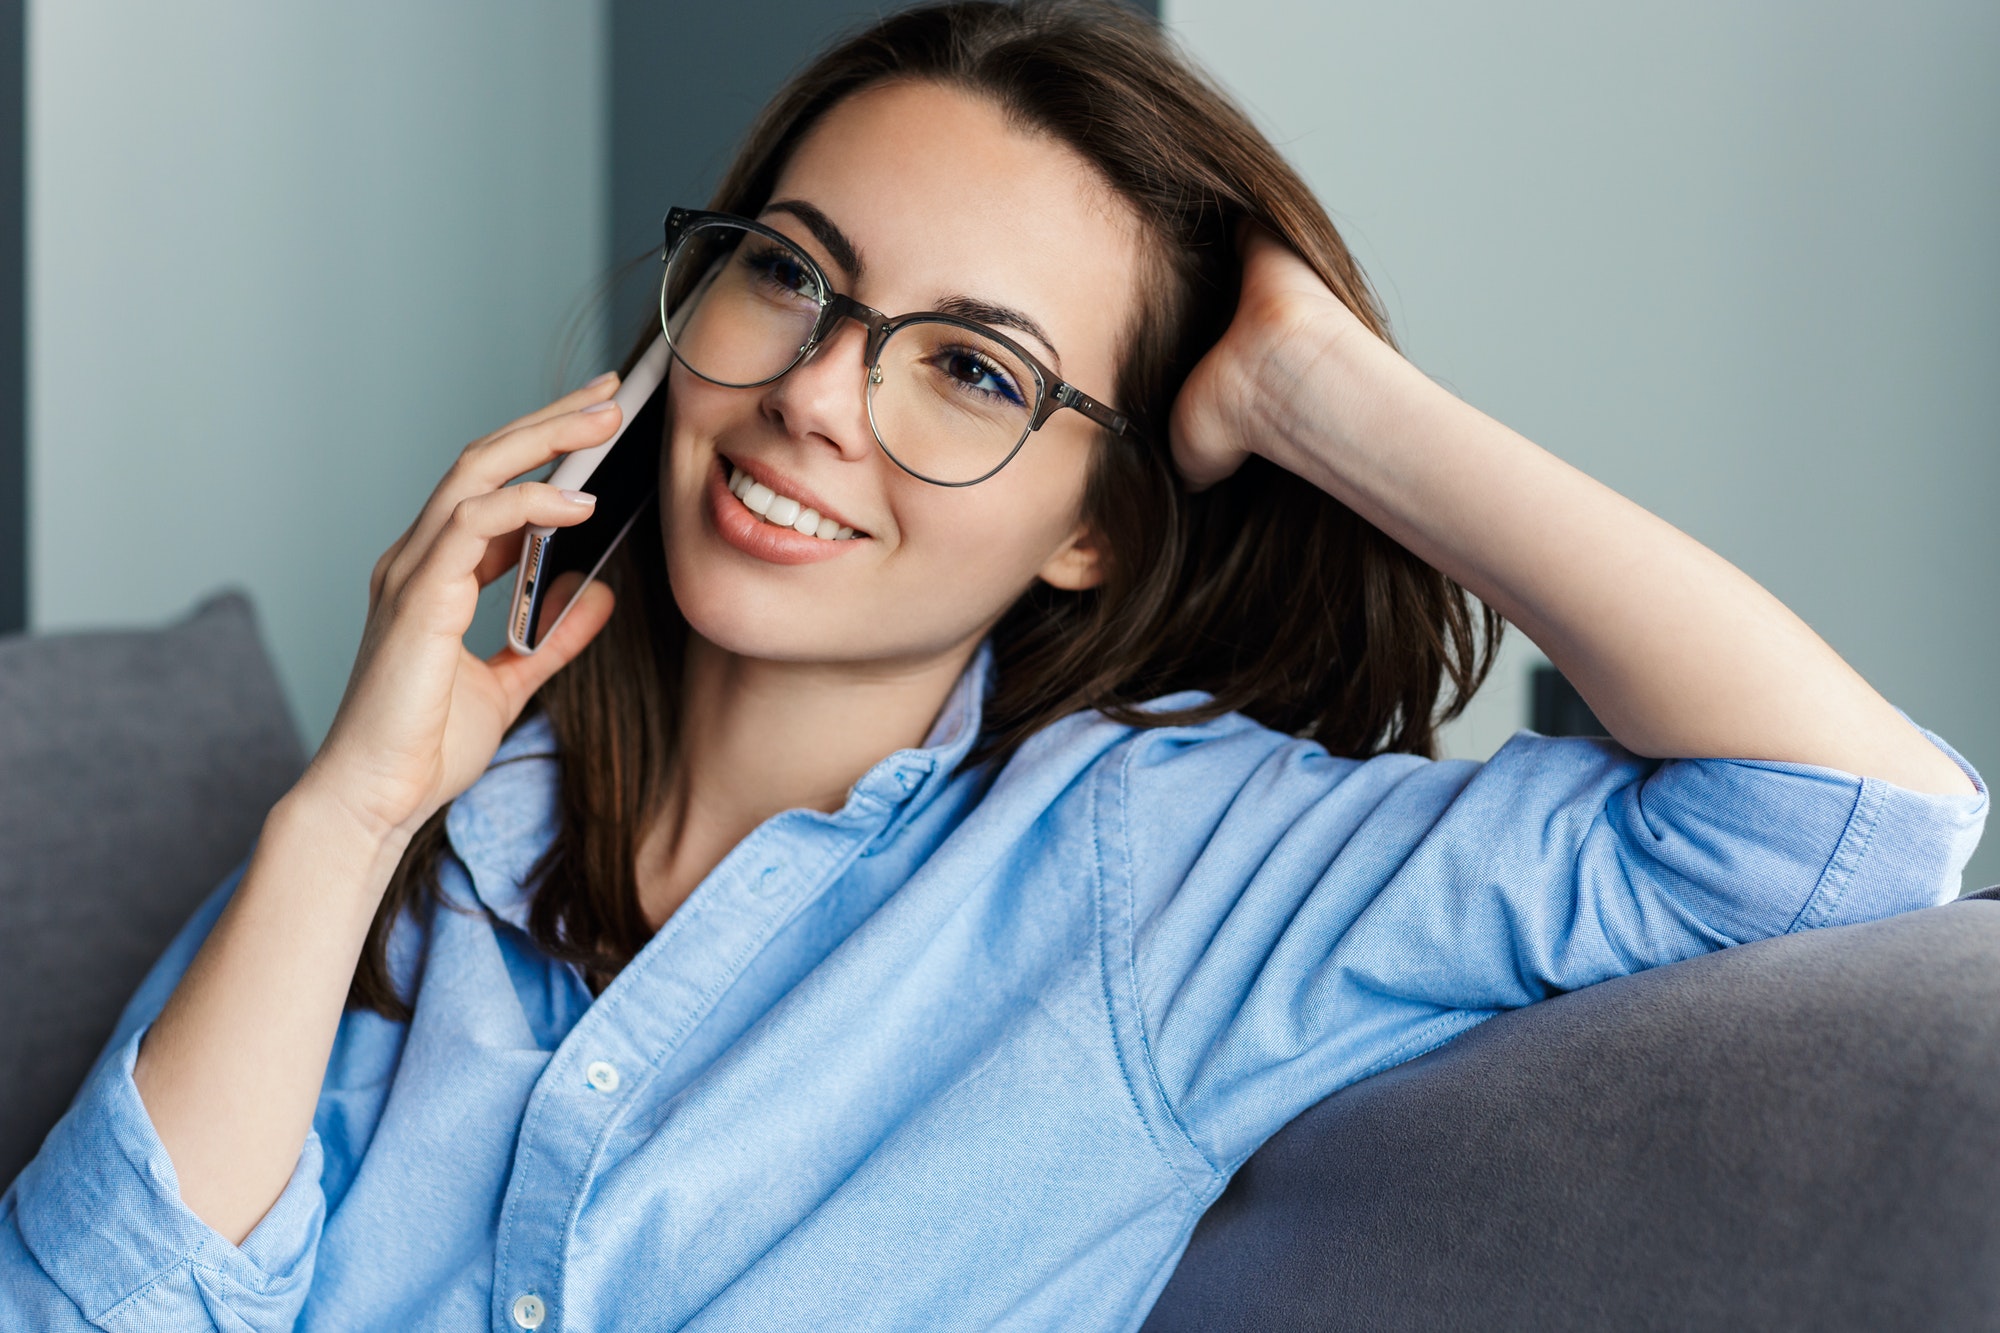 Image of woman talking on cellphone and smiling while sitting